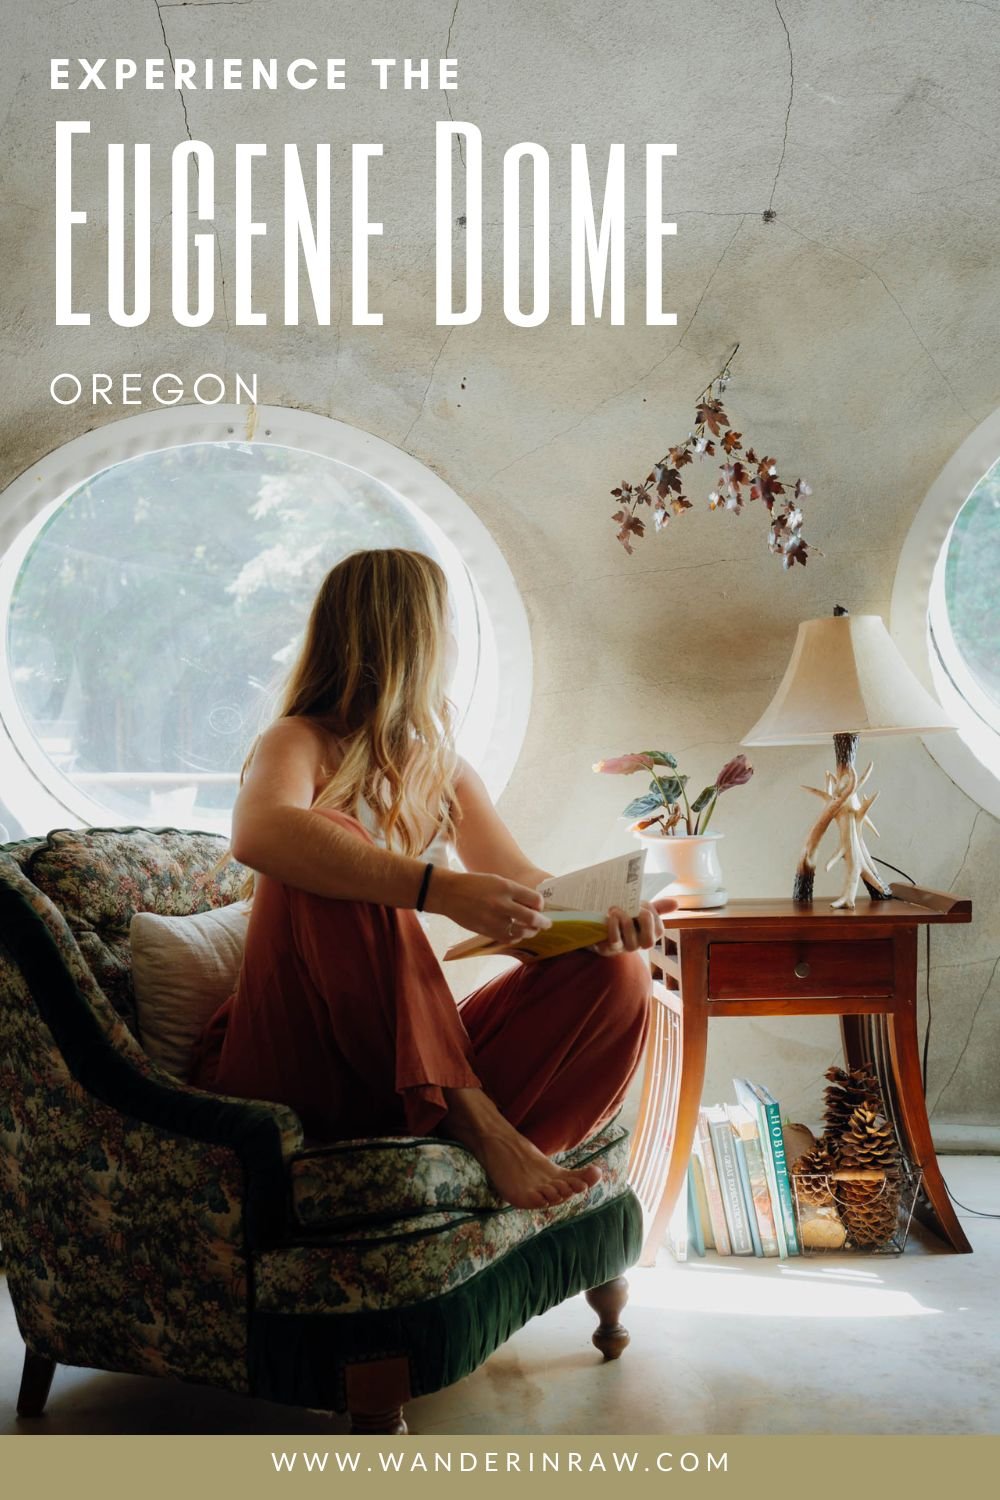 How to Stay at the Eugene Dome home unique stay: An Airbnb in Oregon